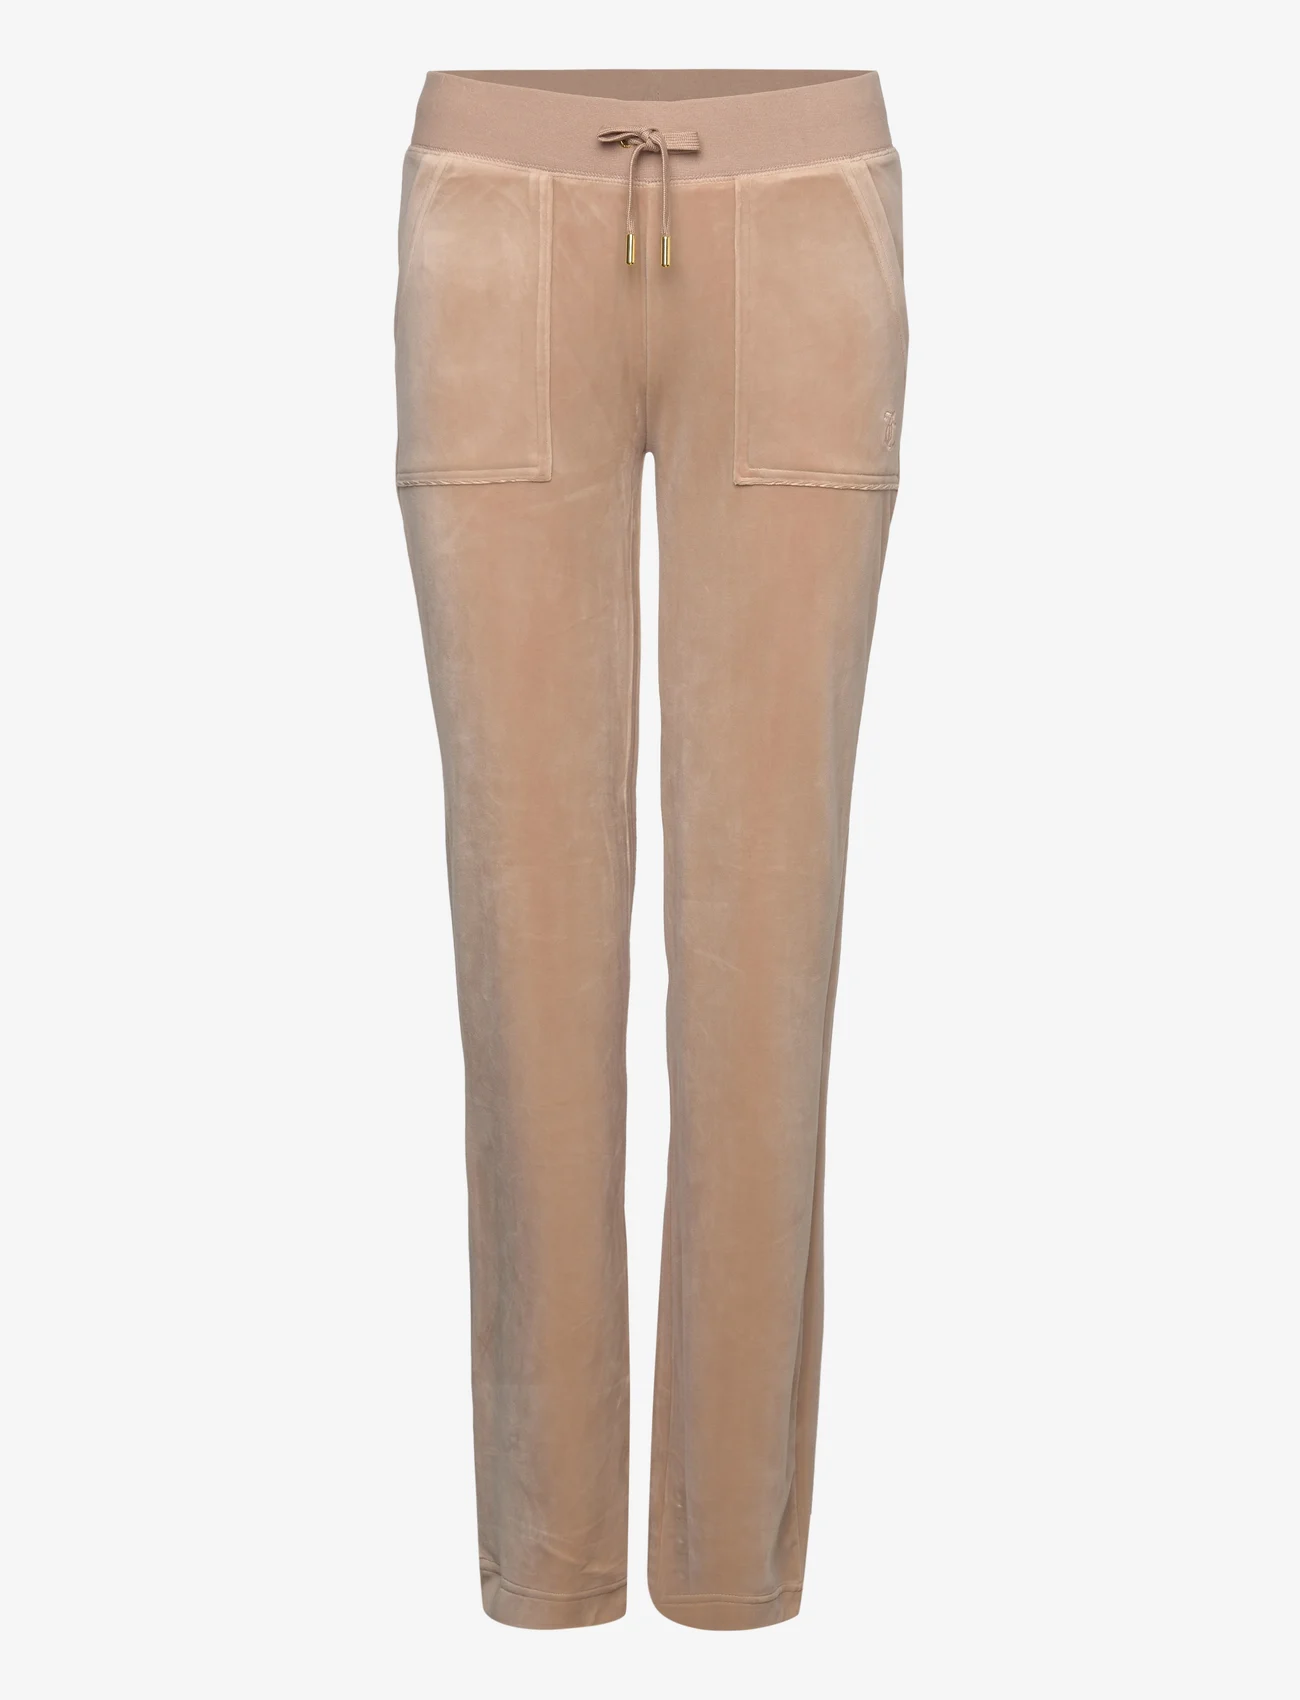 Juicy Couture - GOLD DEL RAY POCKETED PANT - hosen - caramel - 0